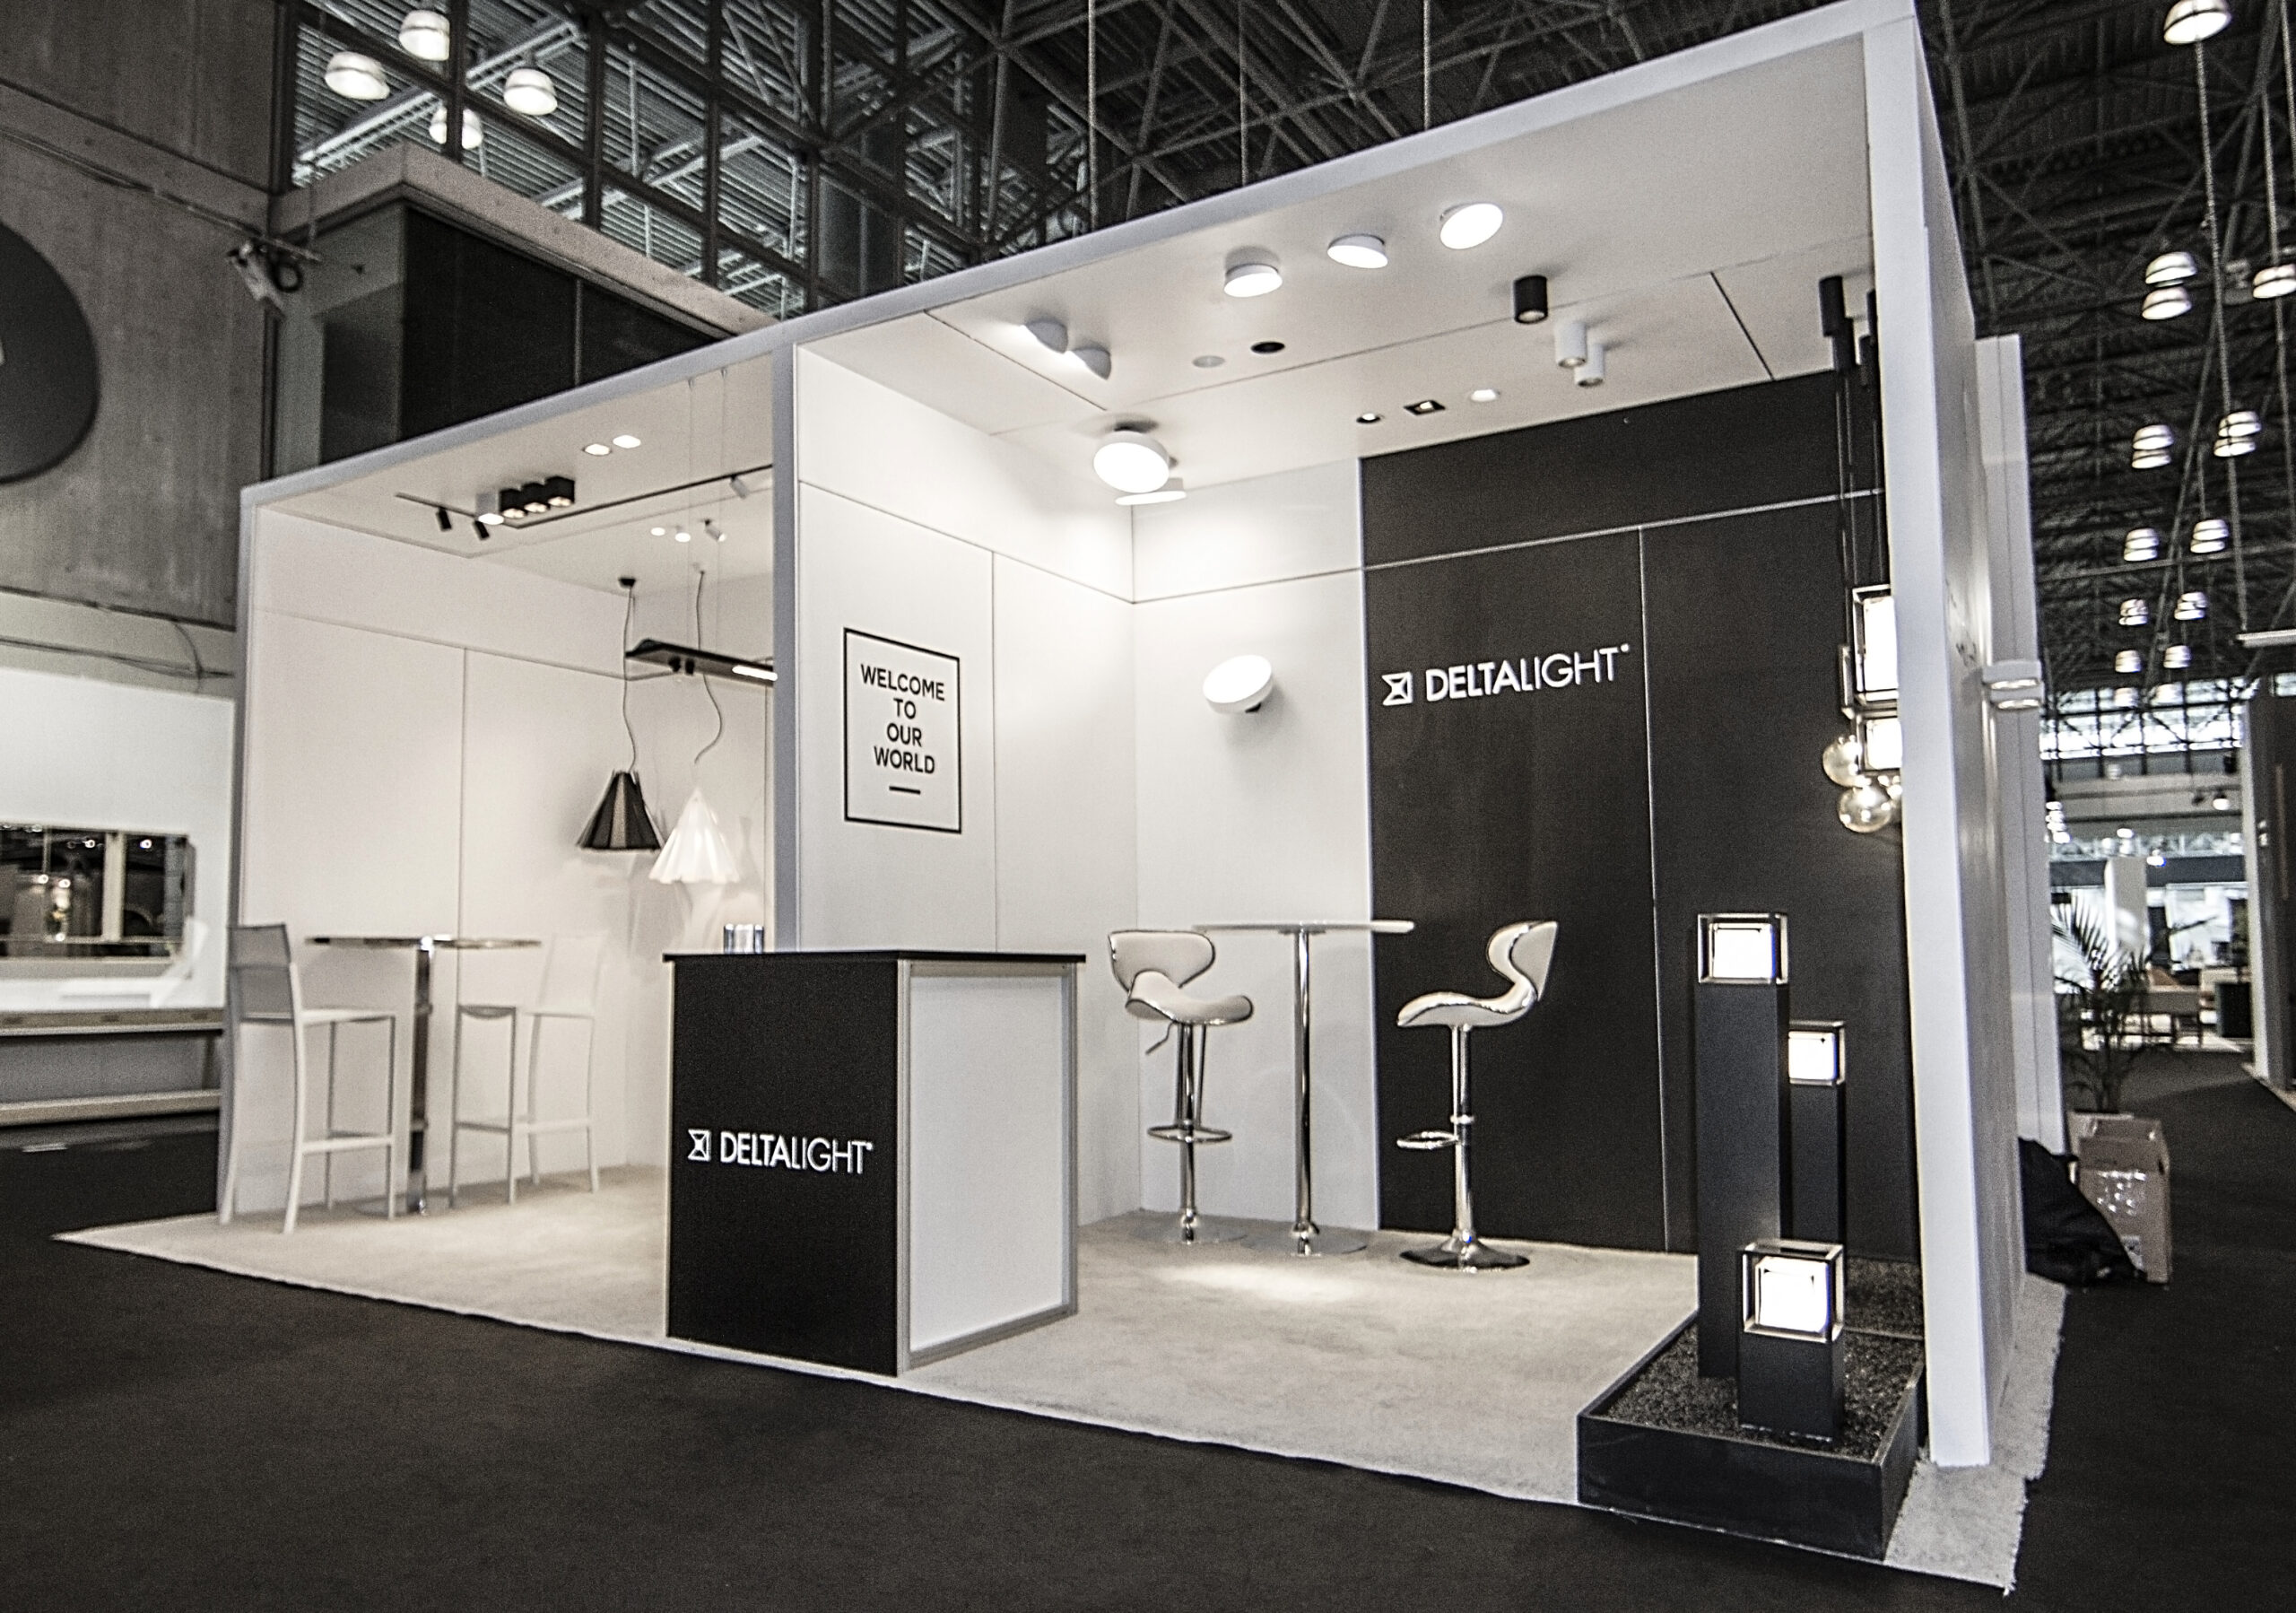 Full View of Delta Light's Rental Exhibit at the International Contemporary Furniture Fair